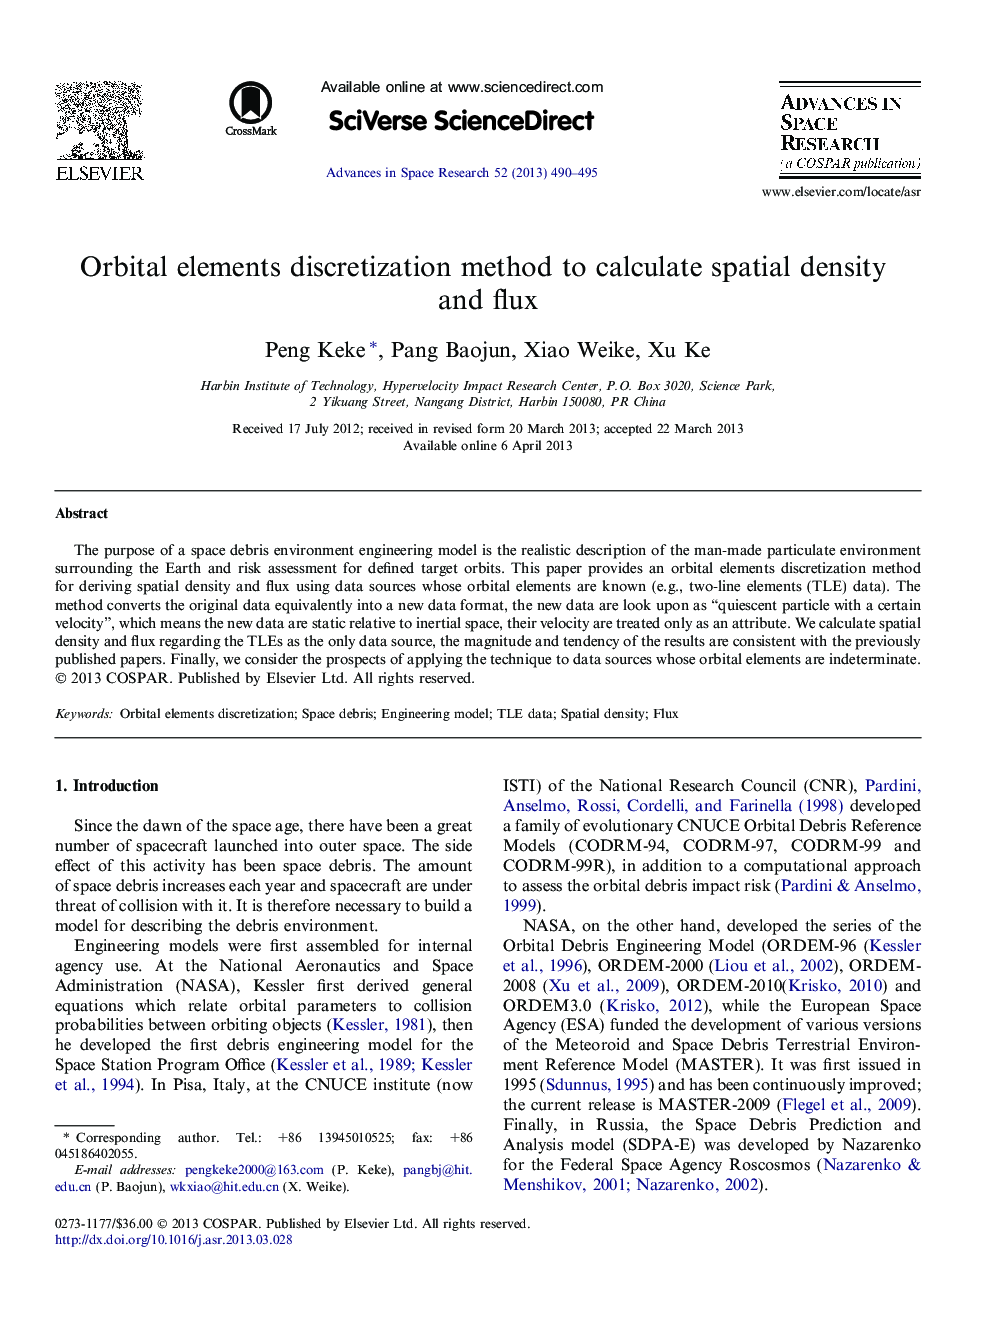 Orbital elements discretization method to calculate spatial density and flux